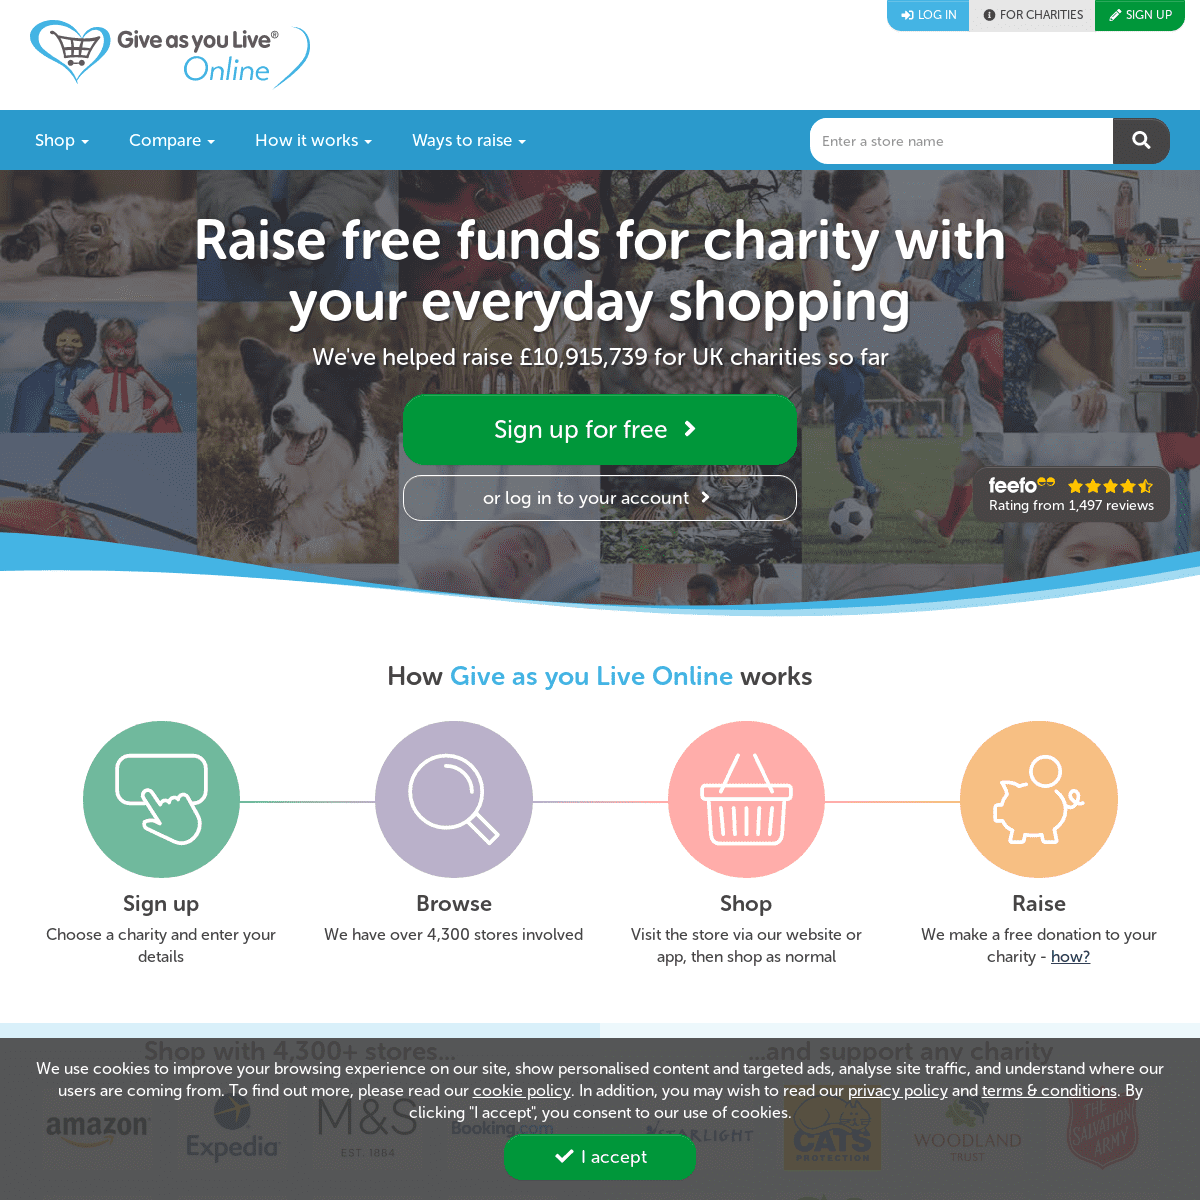 Raise free funds for charity | Give as you Live Online